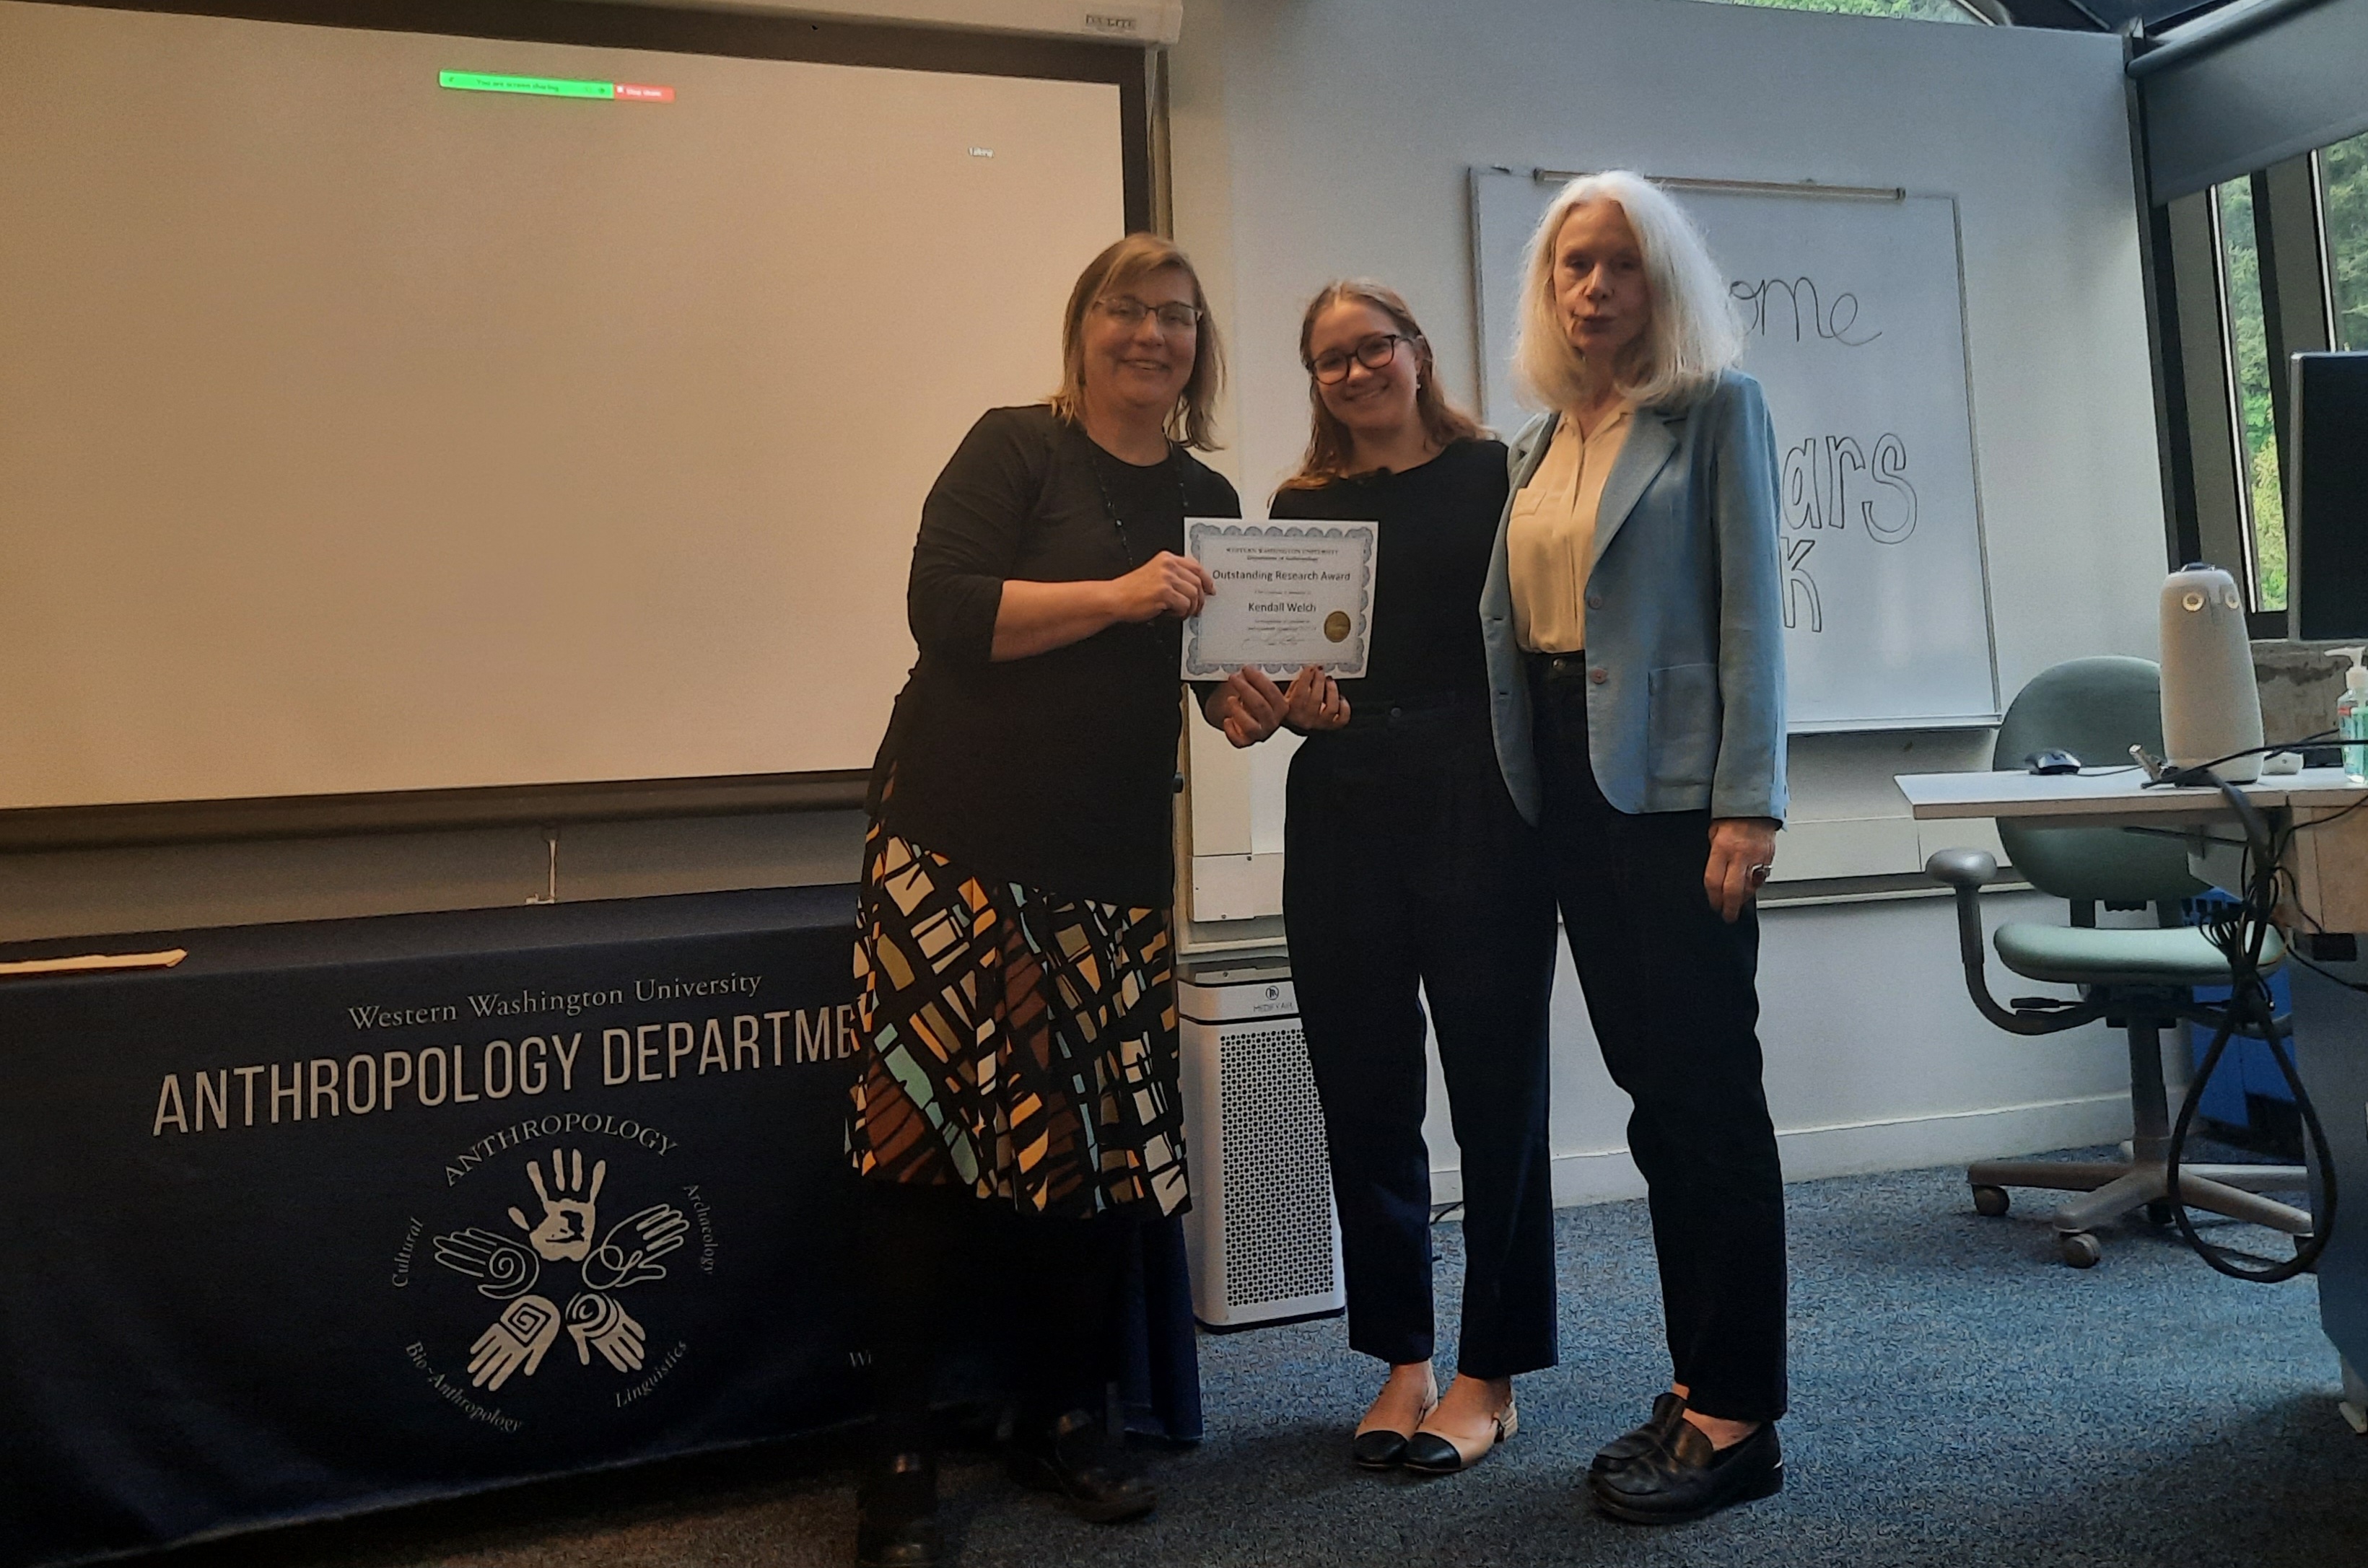 Kendall Welch receiving award from Dr. Judith Pine and Dr. Kathleen Young for Kendall's seminal work titled 'Social Media Warriors: The Use of Social Media as a Weapon in War'.  